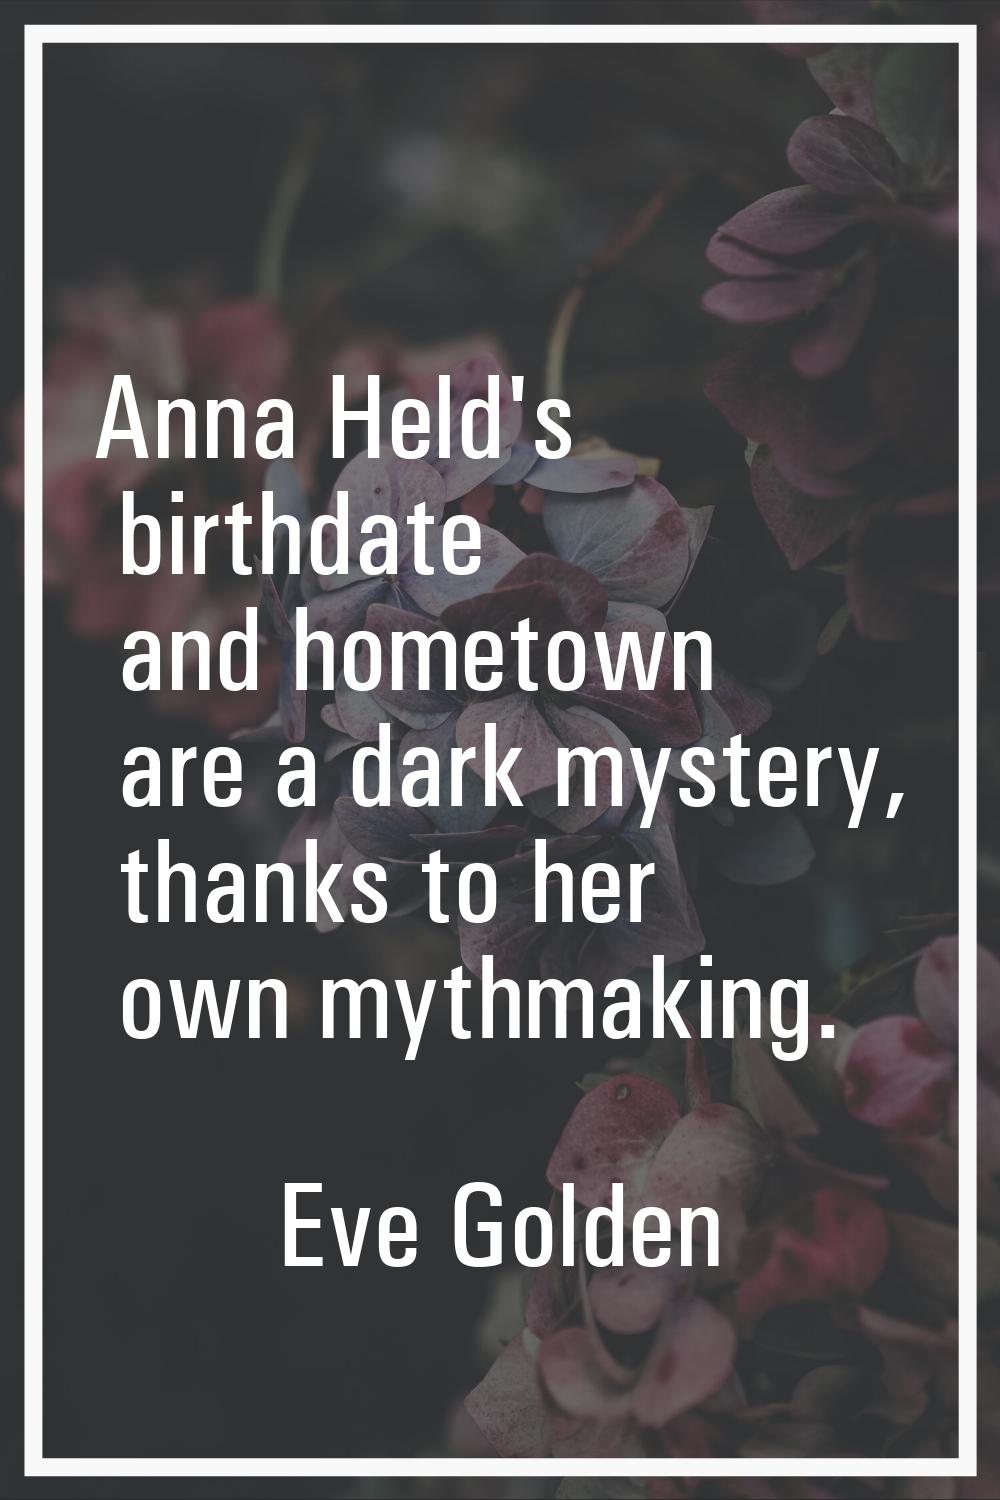 Anna Held's birthdate and hometown are a dark mystery, thanks to her own mythmaking.